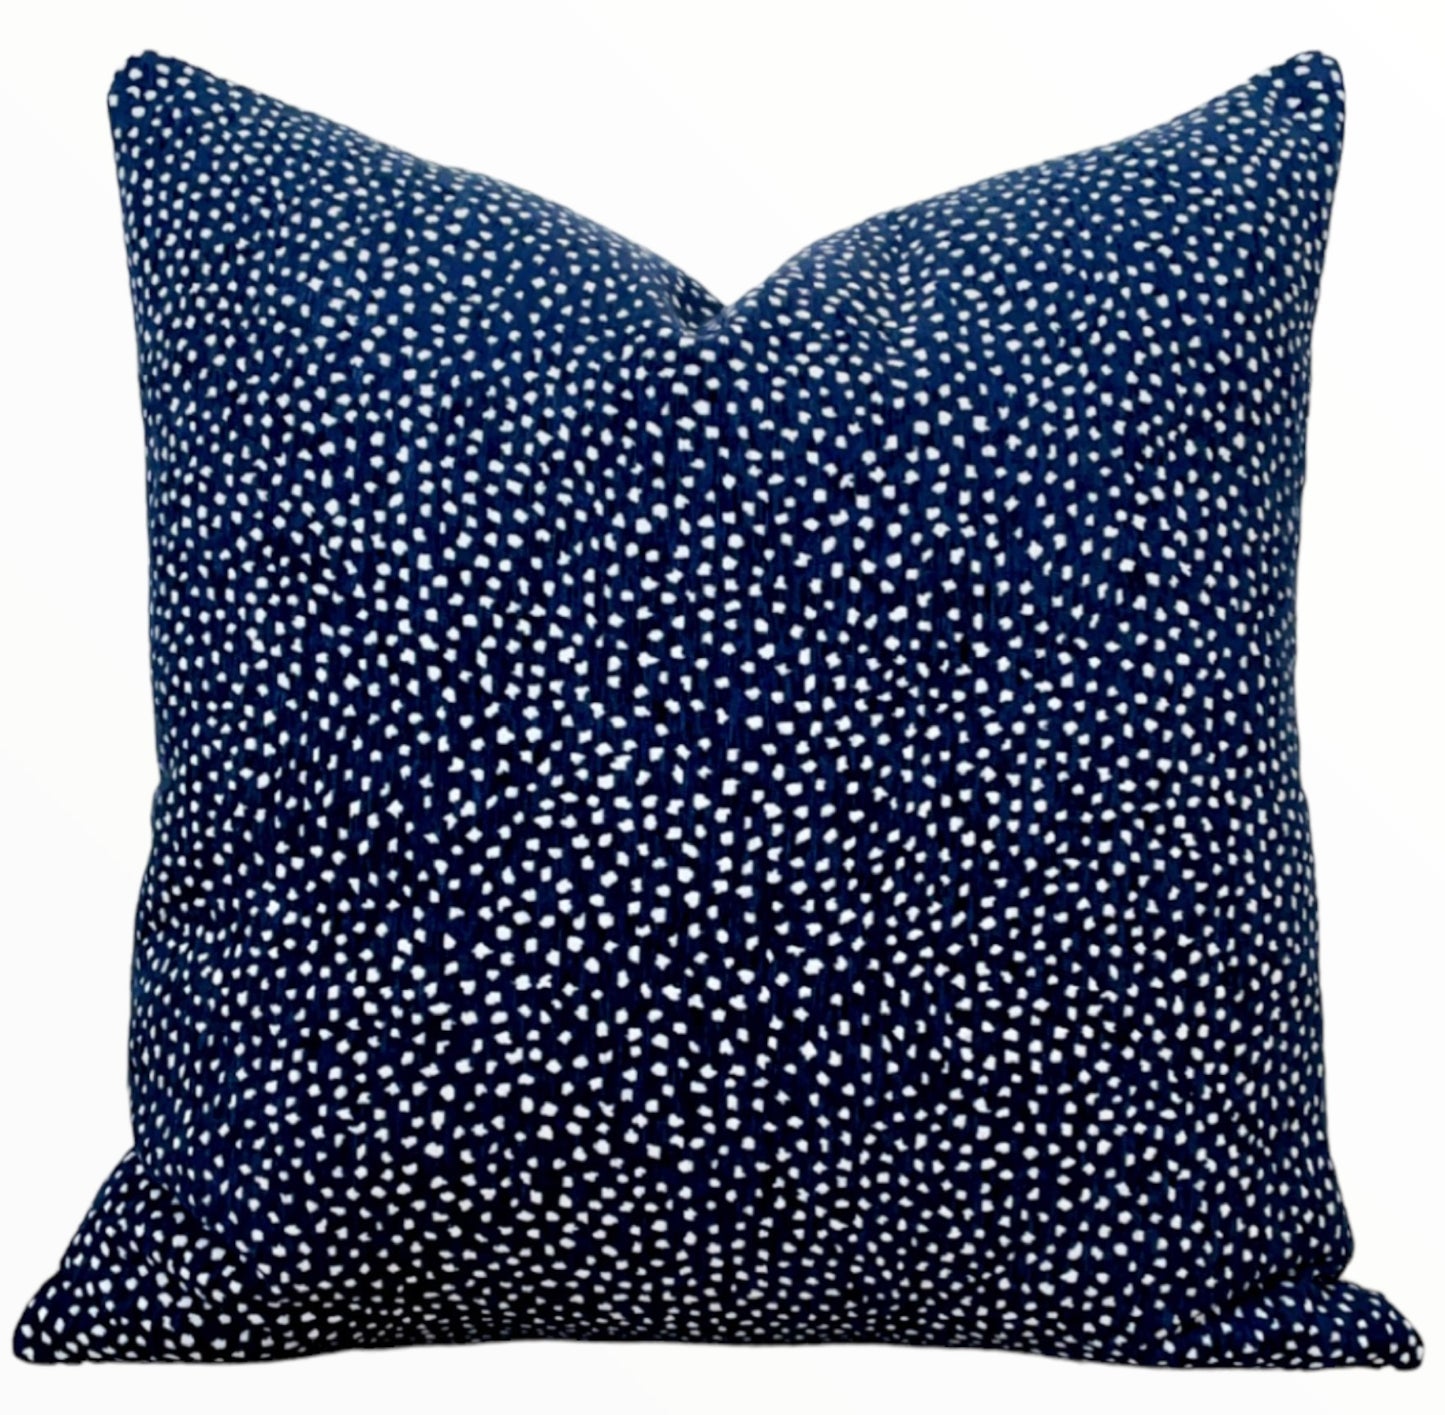 Blue and White Dot Pillow Cover